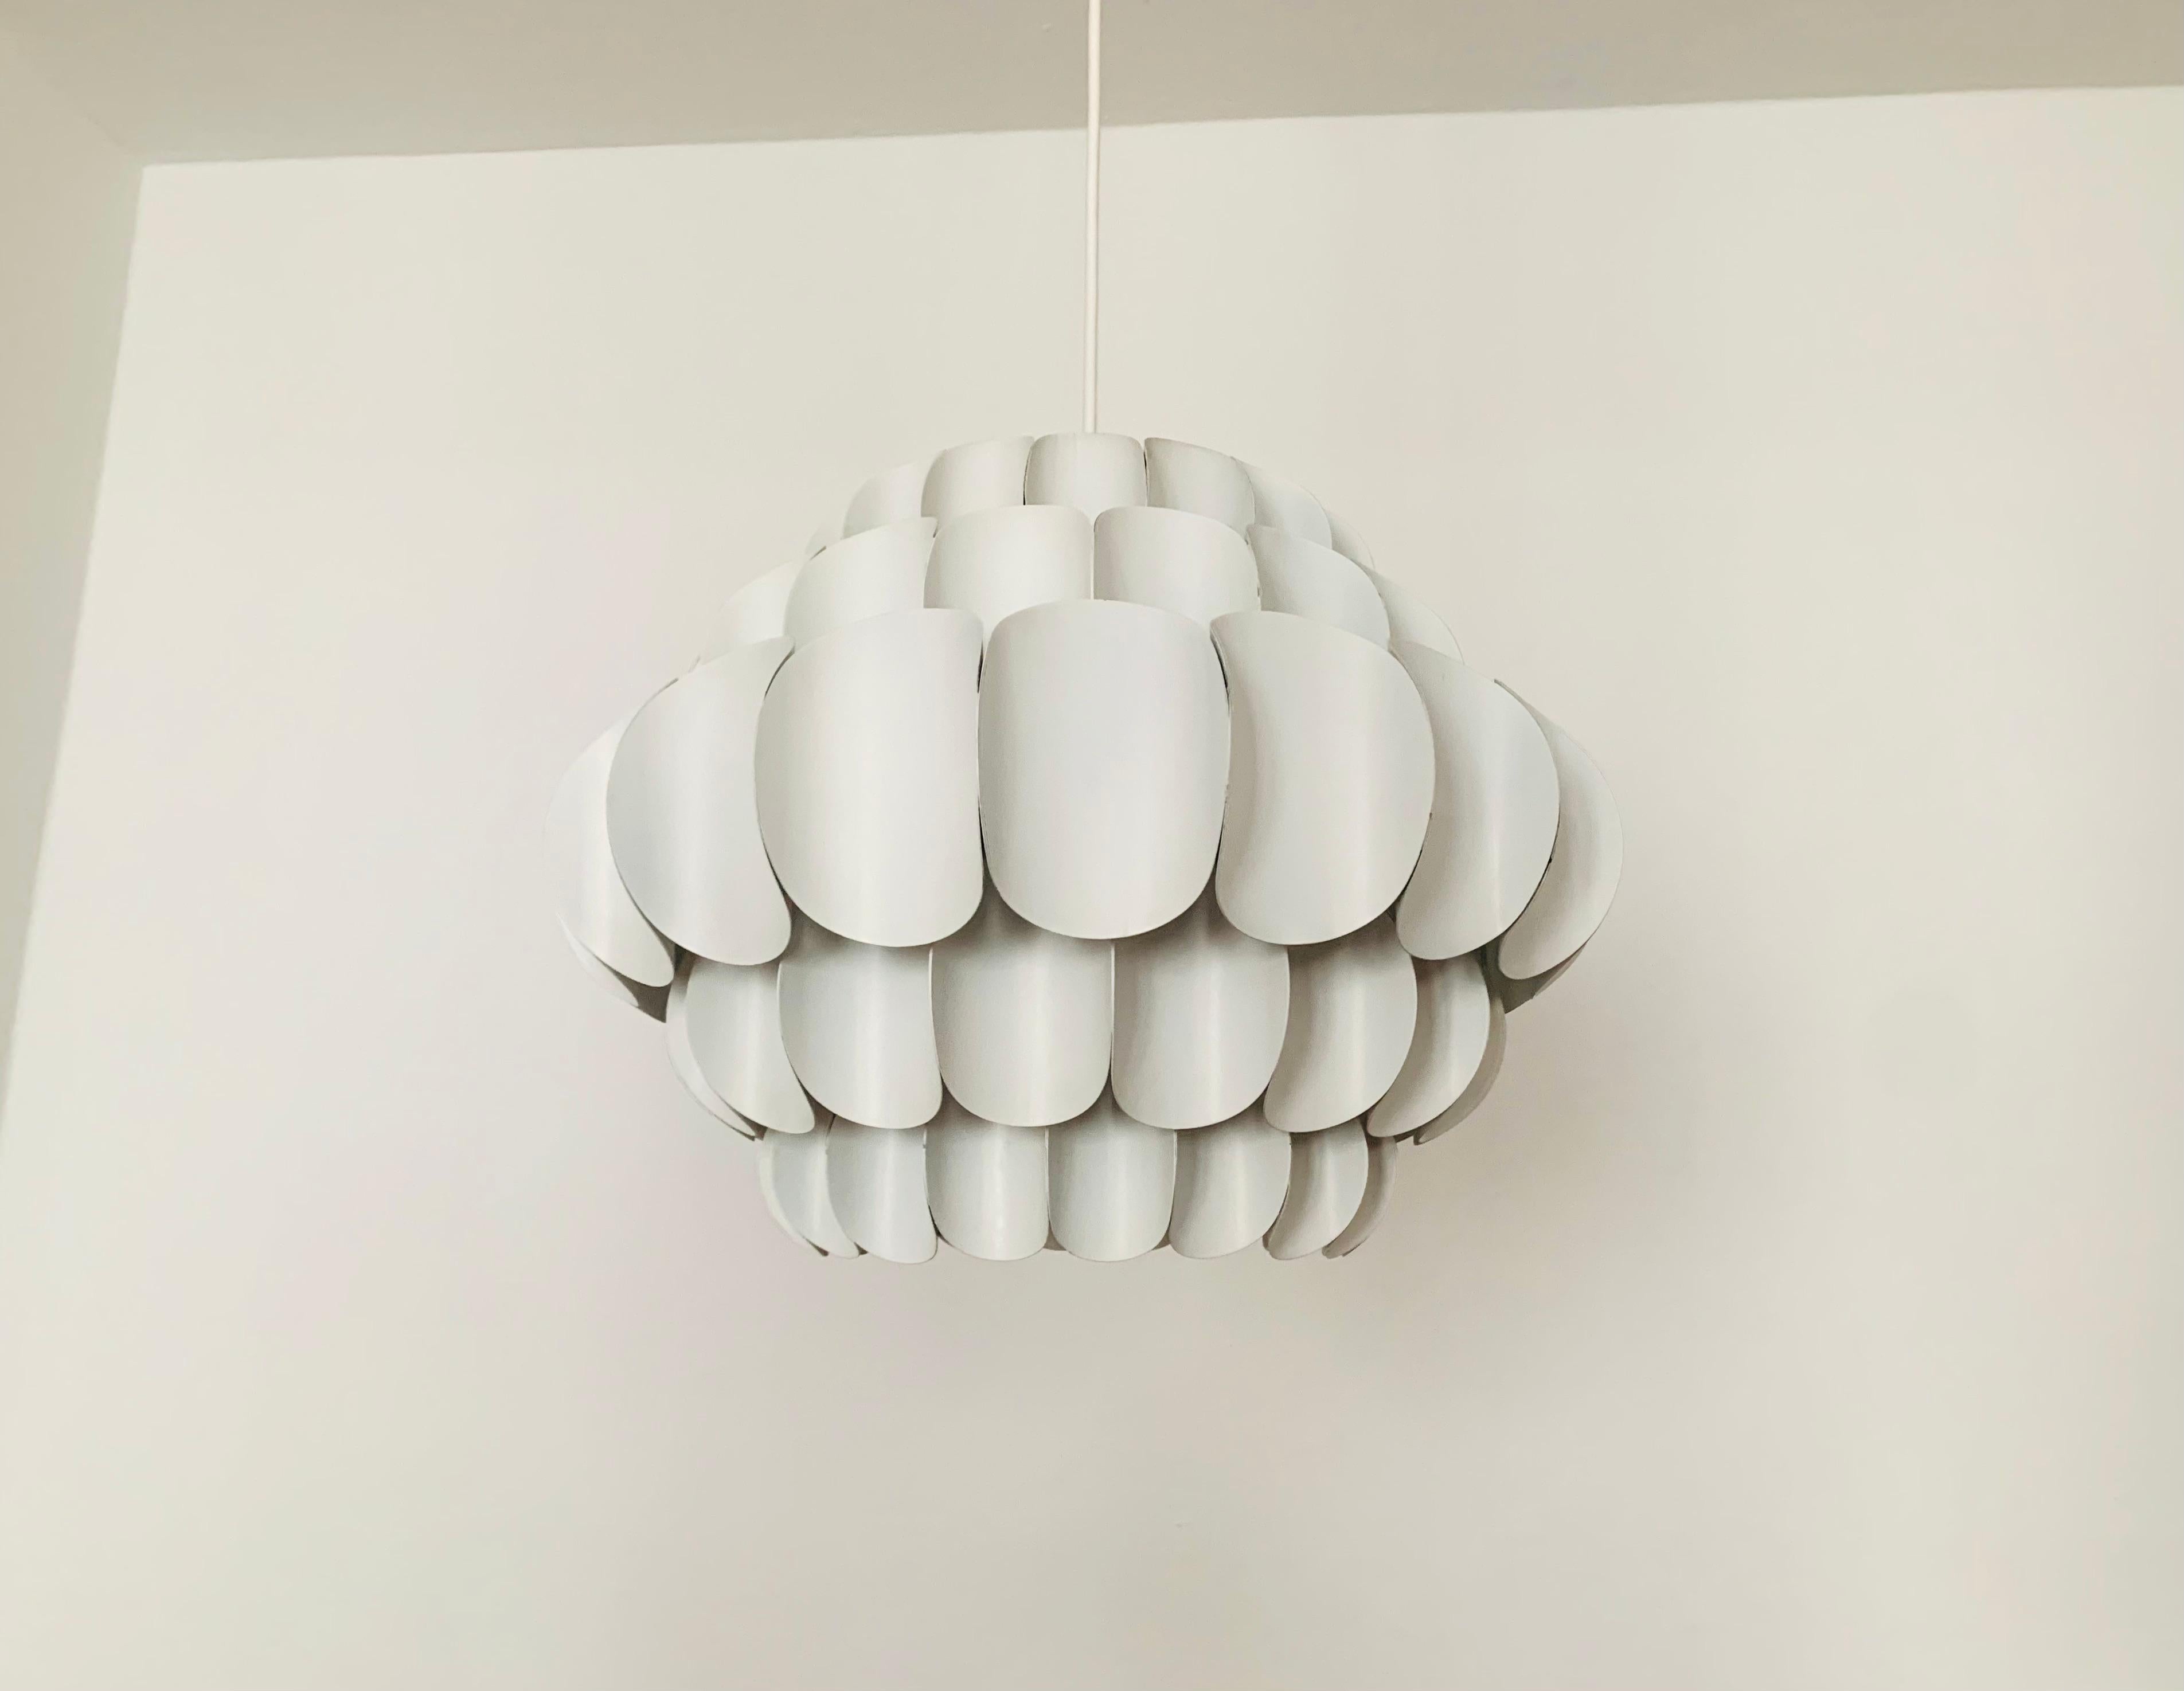 Wonderful white metal pendant lamp by Thorsten Orrling from the 1960s.
The extraordinary design creates a fantastic play of light in the room.
Large version with 5 rows.

Condition:

Very good vintage condition with slight signs of wear consistent